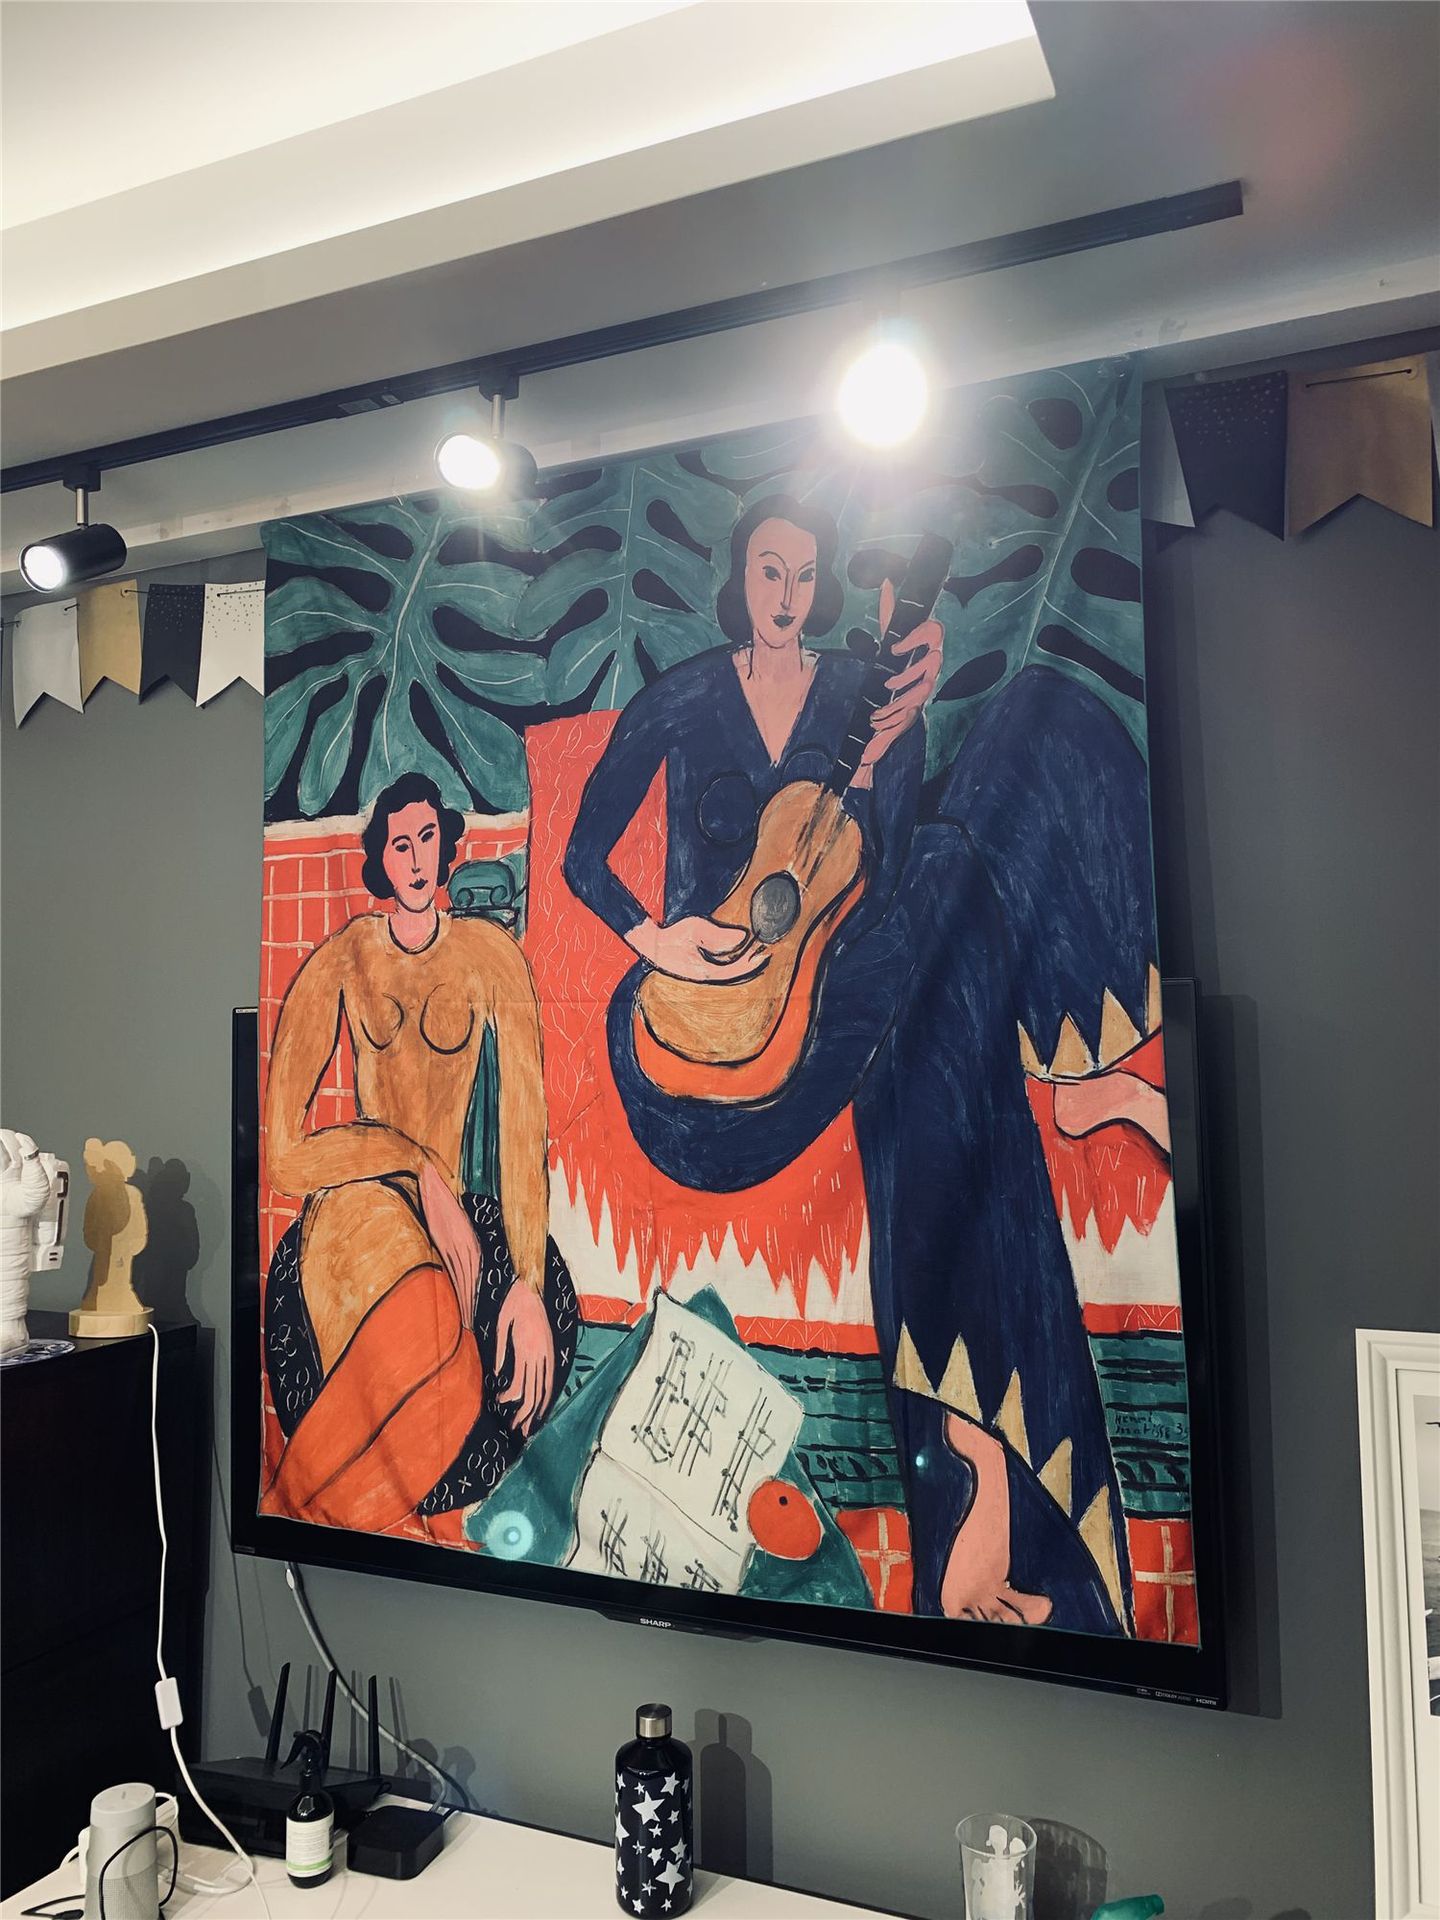 Matisse Women's Guitar Tapestry Home Decorative Cloth Artistic Oil Painting Tapestry Wall Cloth for Living Room Arts and Crafts